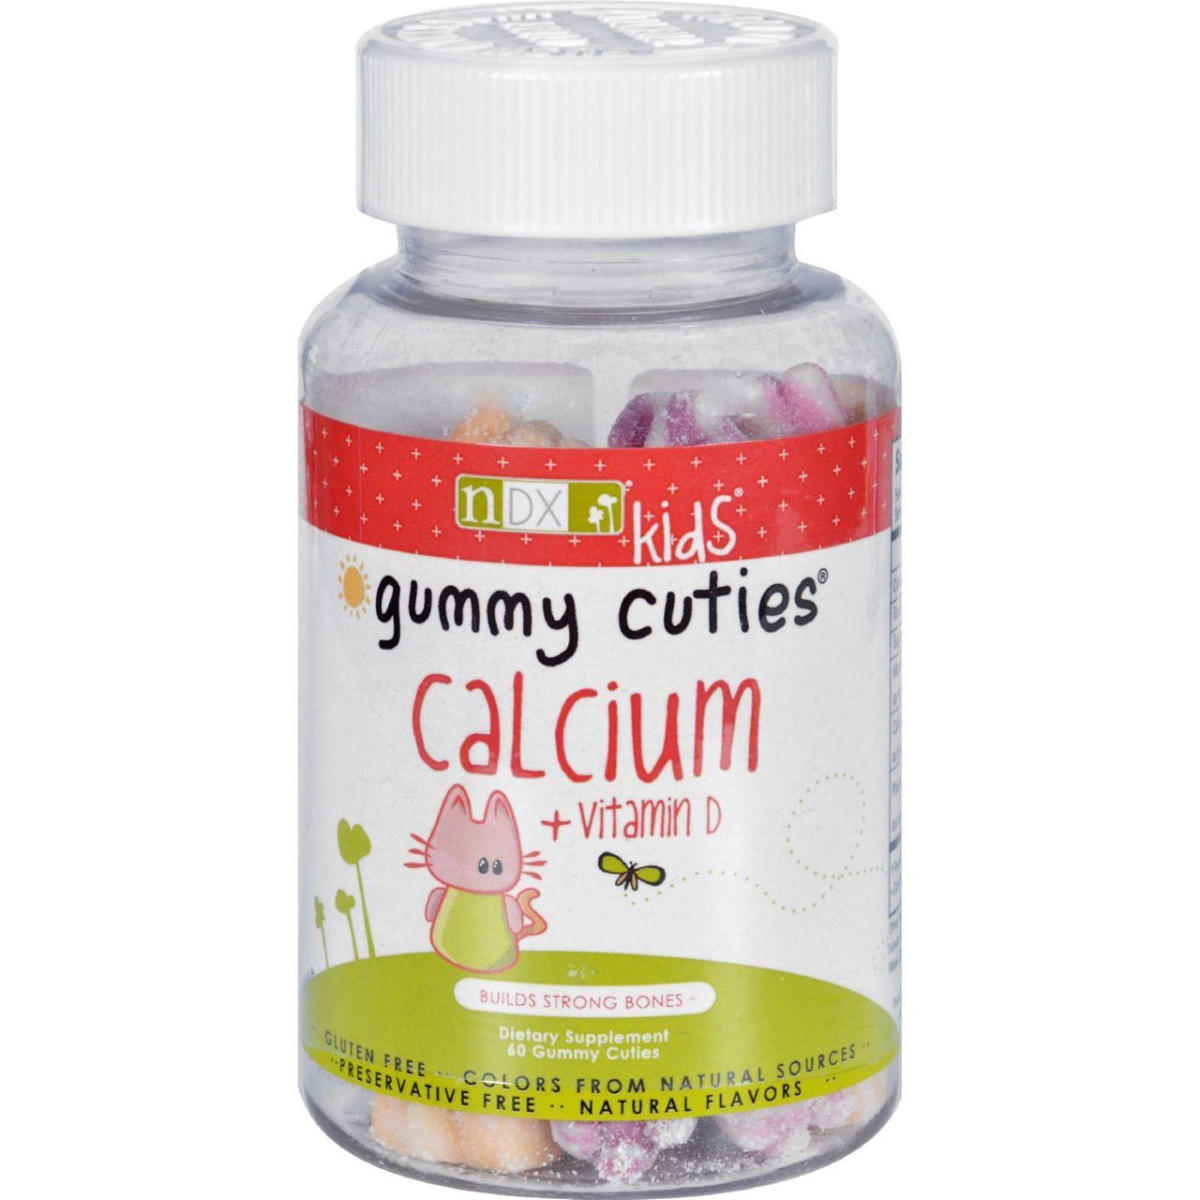 Hg0535187 Calcium With Vitamin D For Kids - 60 Gummies